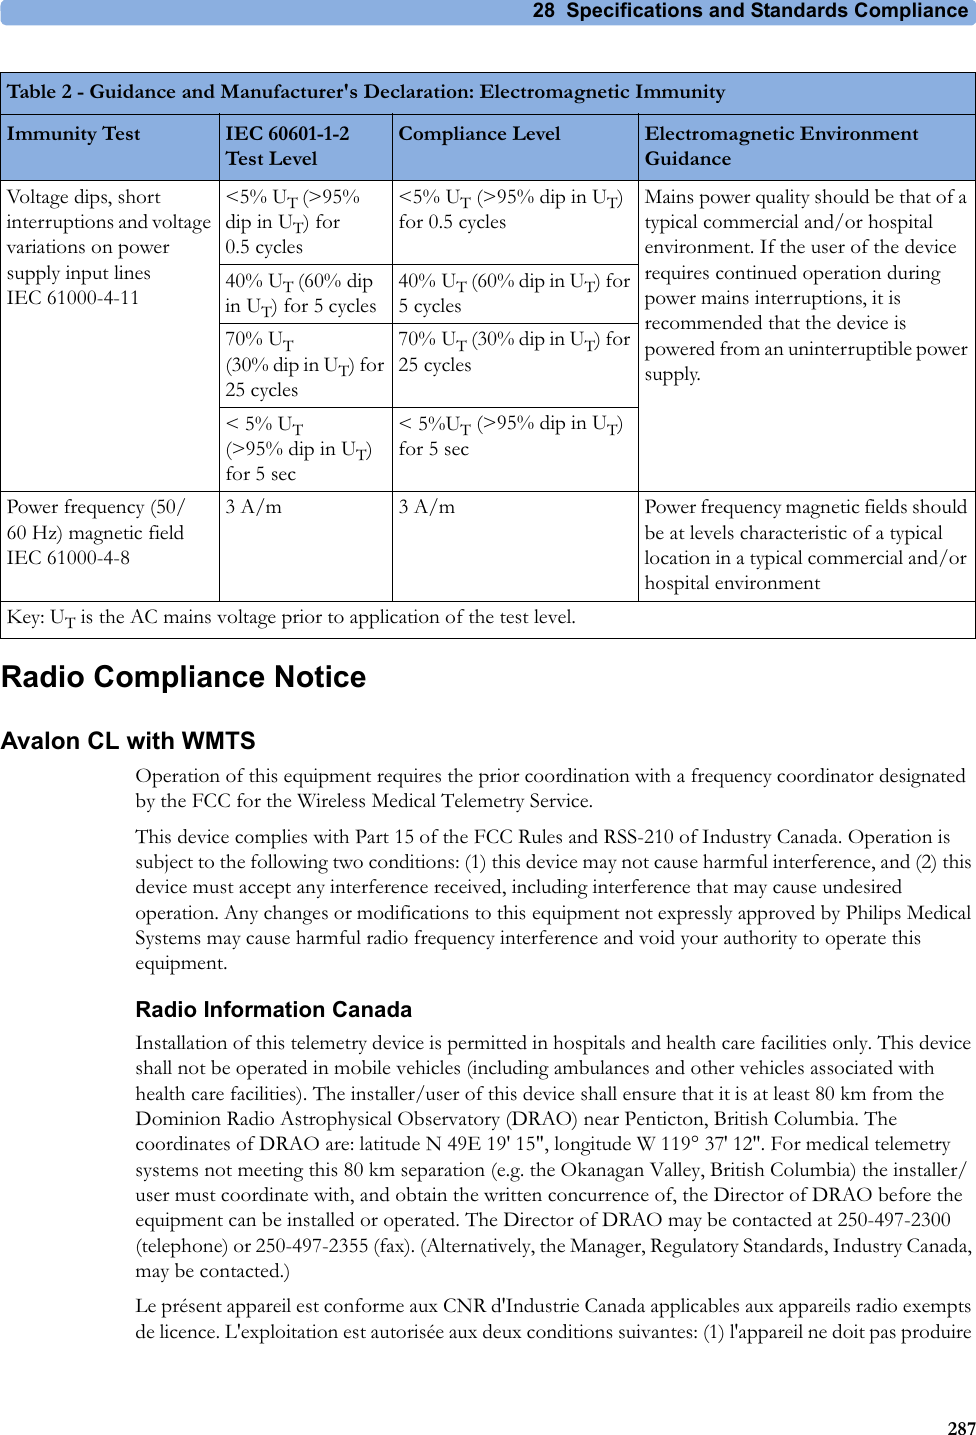 28  Specifications and Standards Compliance287Radio Compliance NoticeAvalon CL with WMTSOperation of this equipment requires the prior coordination with a frequency coordinator designated by the FCC for the Wireless Medical Telemetry Service.This device complies with Part 15 of the FCC Rules and RSS-210 of Industry Canada. Operation is subject to the following two conditions: (1) this device may not cause harmful interference, and (2) this device must accept any interference received, including interference that may cause undesired operation. Any changes or modifications to this equipment not expressly approved by Philips Medical Systems may cause harmful radio frequency interference and void your authority to operate this equipment.Radio Information CanadaInstallation of this telemetry device is permitted in hospitals and health care facilities only. This device shall not be operated in mobile vehicles (including ambulances and other vehicles associated with health care facilities). The installer/user of this device shall ensure that it is at least 80 km from the Dominion Radio Astrophysical Observatory (DRAO) near Penticton, British Columbia. The coordinates of DRAO are: latitude N 49E 19&apos; 15&quot;, longitude W 119° 37! 12&quot;. For medical telemetry systems not meeting this 80 km separation (e.g. the Okanagan Valley, British Columbia) the installer/user must coordinate with, and obtain the written concurrence of, the Director of DRAO before the equipment can be installed or operated. The Director of DRAO may be contacted at 250-497-2300 (telephone) or 250-497-2355 (fax). (Alternatively, the Manager, Regulatory Standards, Industry Canada, may be contacted.)Le présent appareil est conforme aux CNR d&apos;Industrie Canada applicables aux appareils radio exempts de licence. L&apos;exploitation est autorisée aux deux conditions suivantes: (1) l&apos;appareil ne doit pas produire Voltage dips, short interruptions and voltage variations on power supply input lines IEC 61000-4-11&lt;5% UT (&gt;95% dip in UT) for 0.5 cycles&lt;5% UT (&gt;95% dip in UT) for 0.5 cyclesMains power quality should be that of a typical commercial and/or hospital environment. If the user of the device requires continued operation during power mains interruptions, it is recommended that the device is powered from an uninterruptible power supply.40% UT (60% dip in UT) for 5 cycles40% UT (60% dip in UT) for 5 cycles70% UT (30% dip in UT) for 25 cycles70% UT (30% dip in UT) for 25 cycles&lt; 5% UT (&gt;95% dip in UT) for 5 sec&lt; 5%UT (&gt;95% dip in UT) for 5 secPower frequency (50/60 Hz) magnetic field IEC 61000-4-83 A/m 3 A/m Power frequency magnetic fields should be at levels characteristic of a typical location in a typical commercial and/or hospital environmentKey: UT is the AC mains voltage prior to application of the test level.Table 2 - Guidance and Manufacturer&apos;s Declaration: Electromagnetic ImmunityImmunity Test IEC 60601-1-2  Test LevelCompliance Level Electromagnetic Environment Guidance